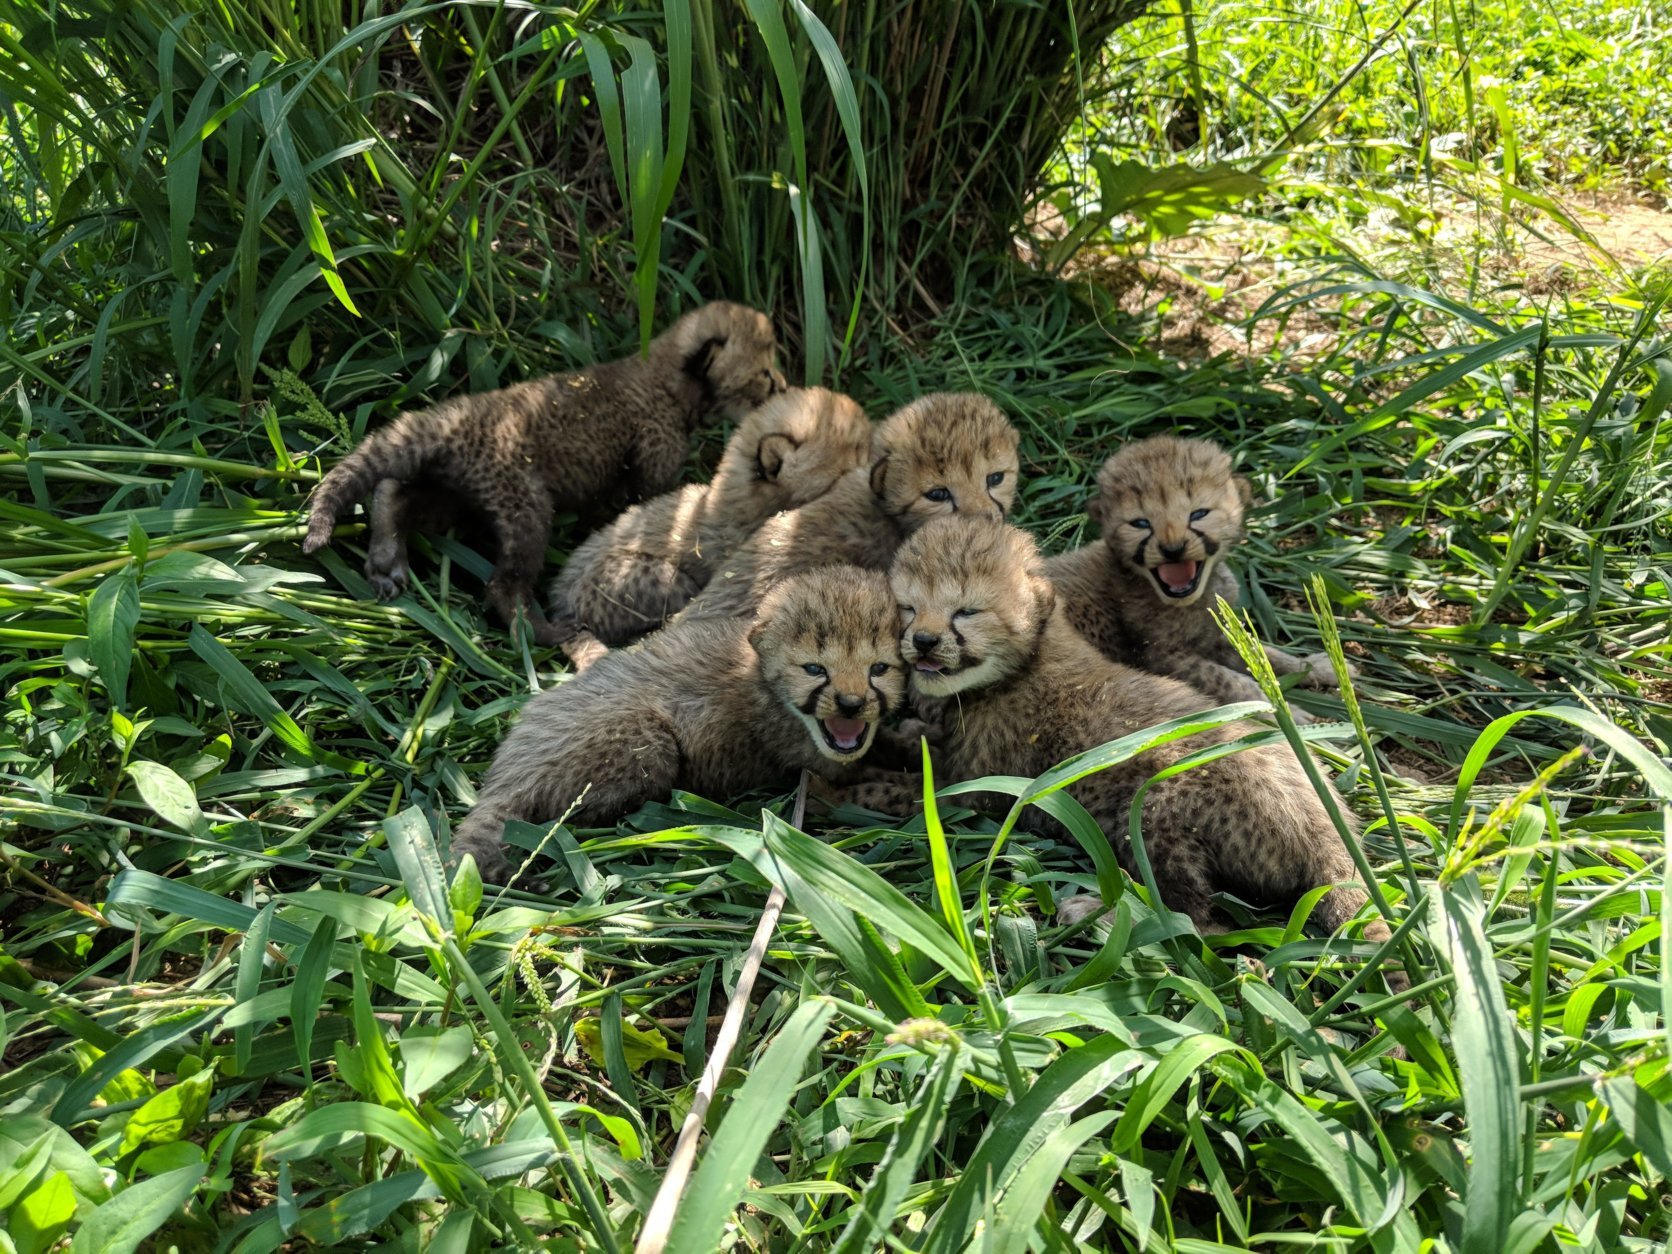 The seven new cheetah cubs, born July 9, appear to be in good health. (Courtesy Smithsonian Conservation Biology Institute/Adriana Kopp)